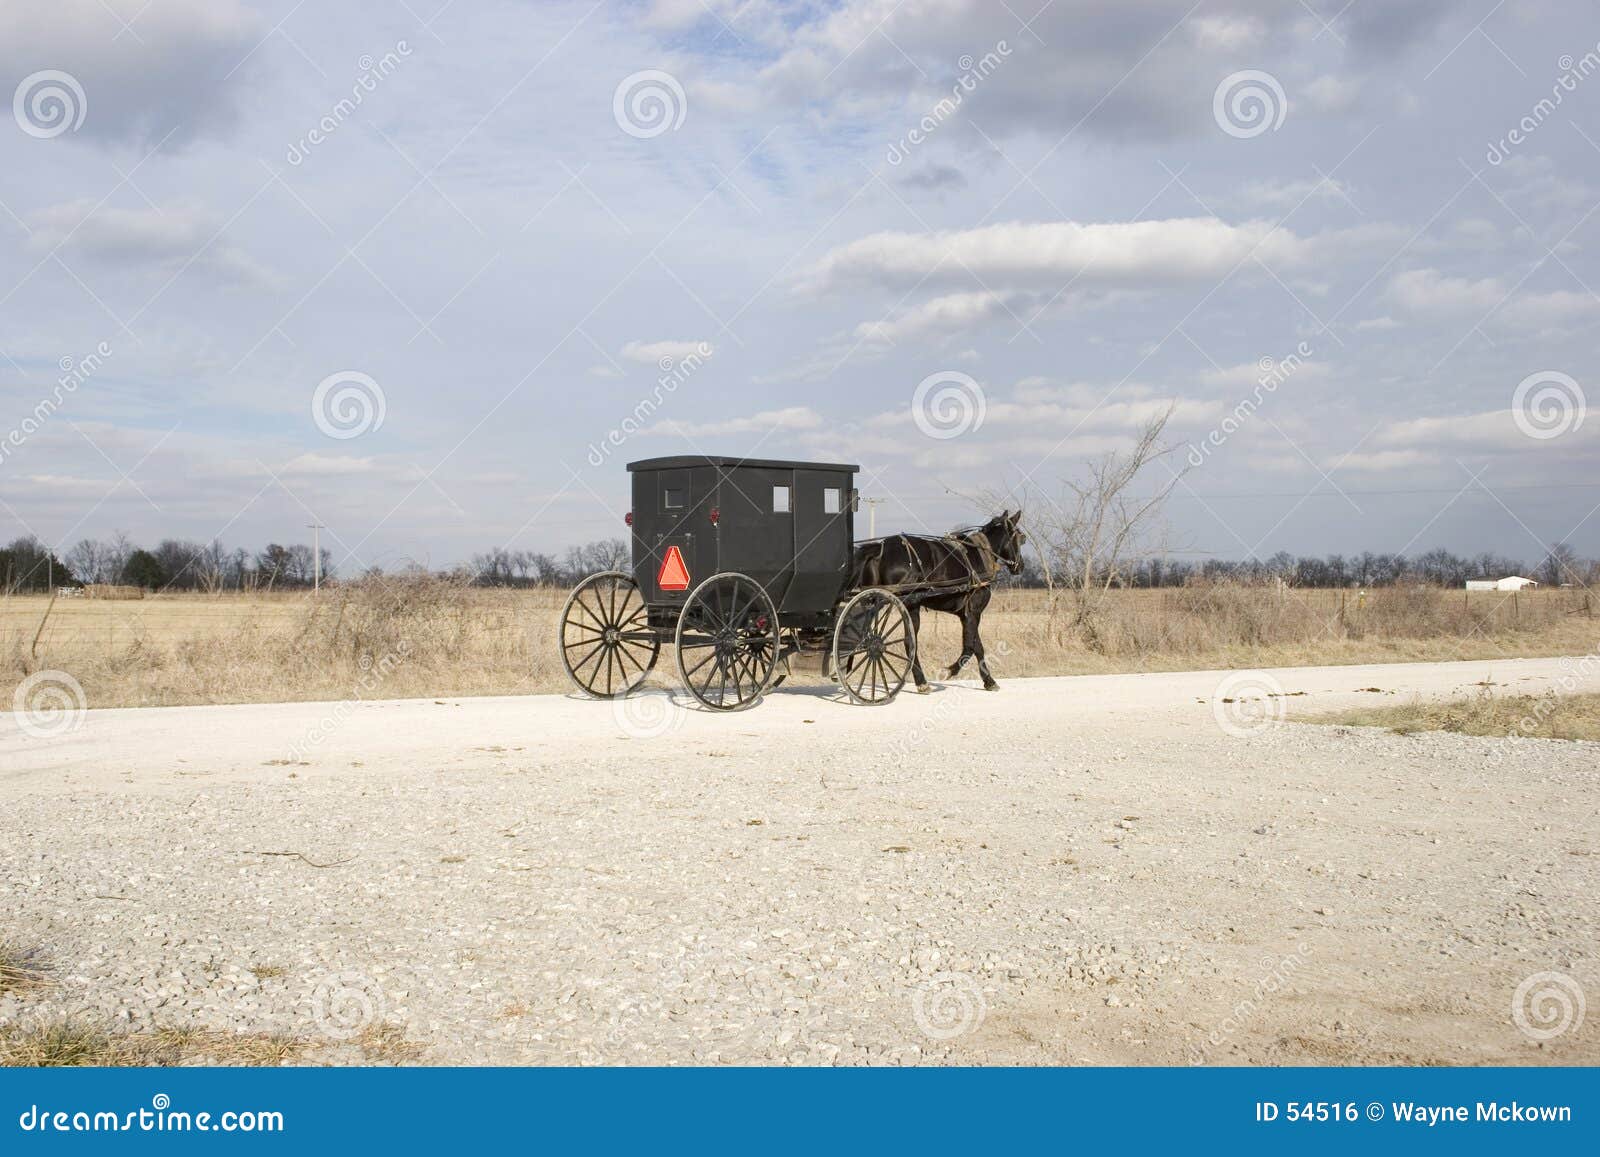 amish buggy and countryside